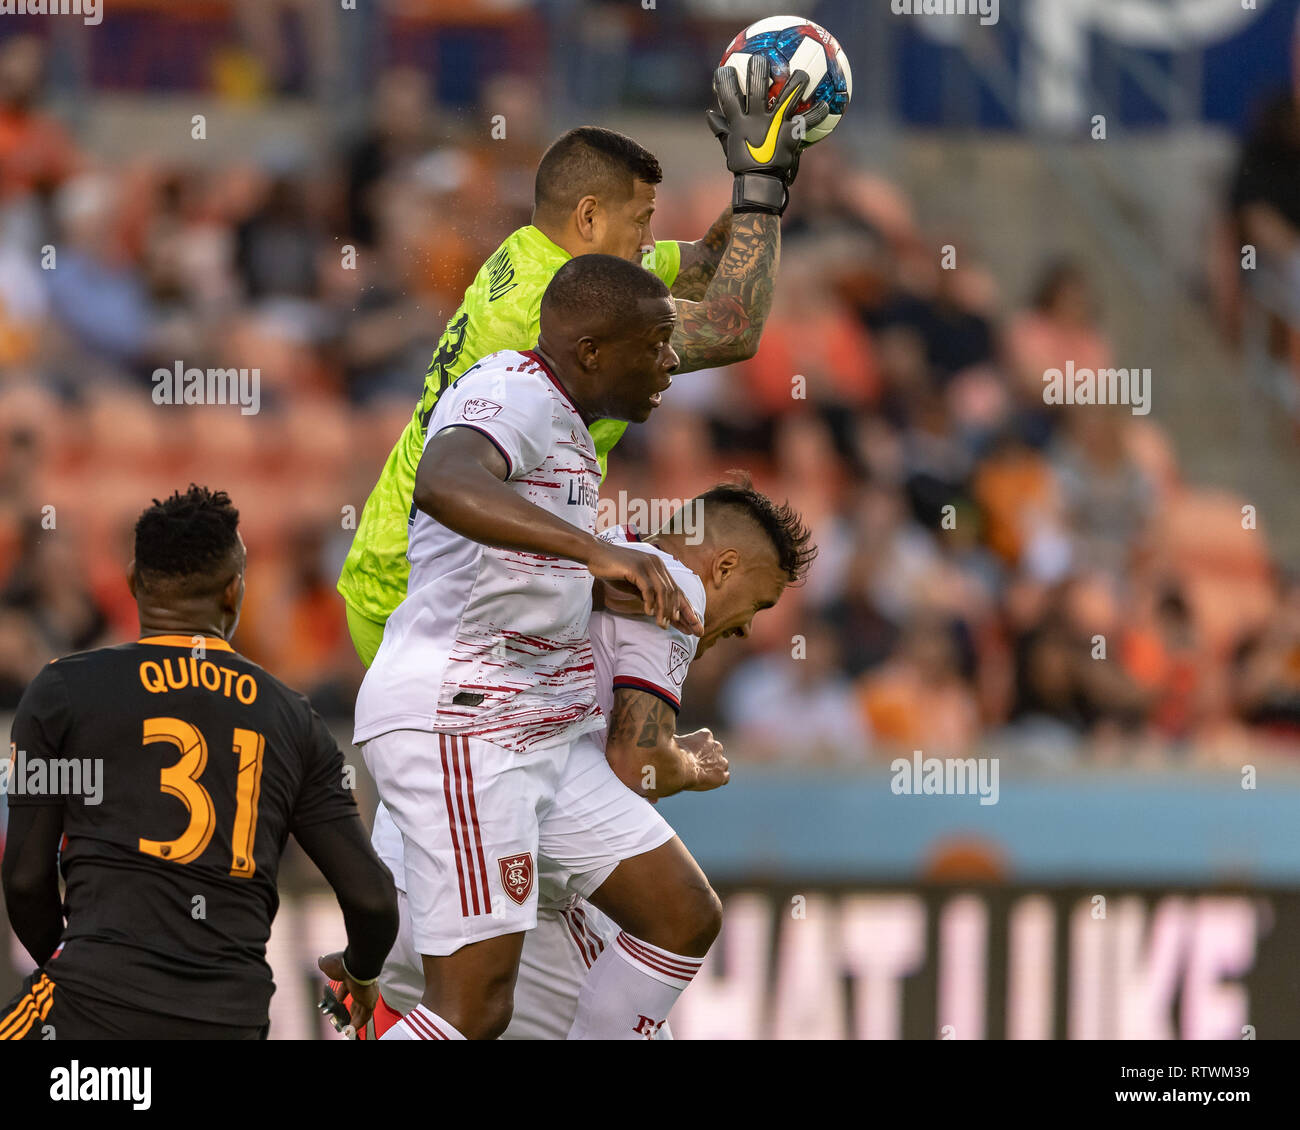 March 02, 2019: Real Salt Lake goalkeeper Nick Rimando (18) with the save while his teammates help defend during a match between Real Salt Lake and Houston Dynamo at BBVA Compass Stadium in Houston, Texas Houston Dynamo tie with Real Salt Lake1-1 © Maria Lysaker/Cal Sport Media Stock Photo